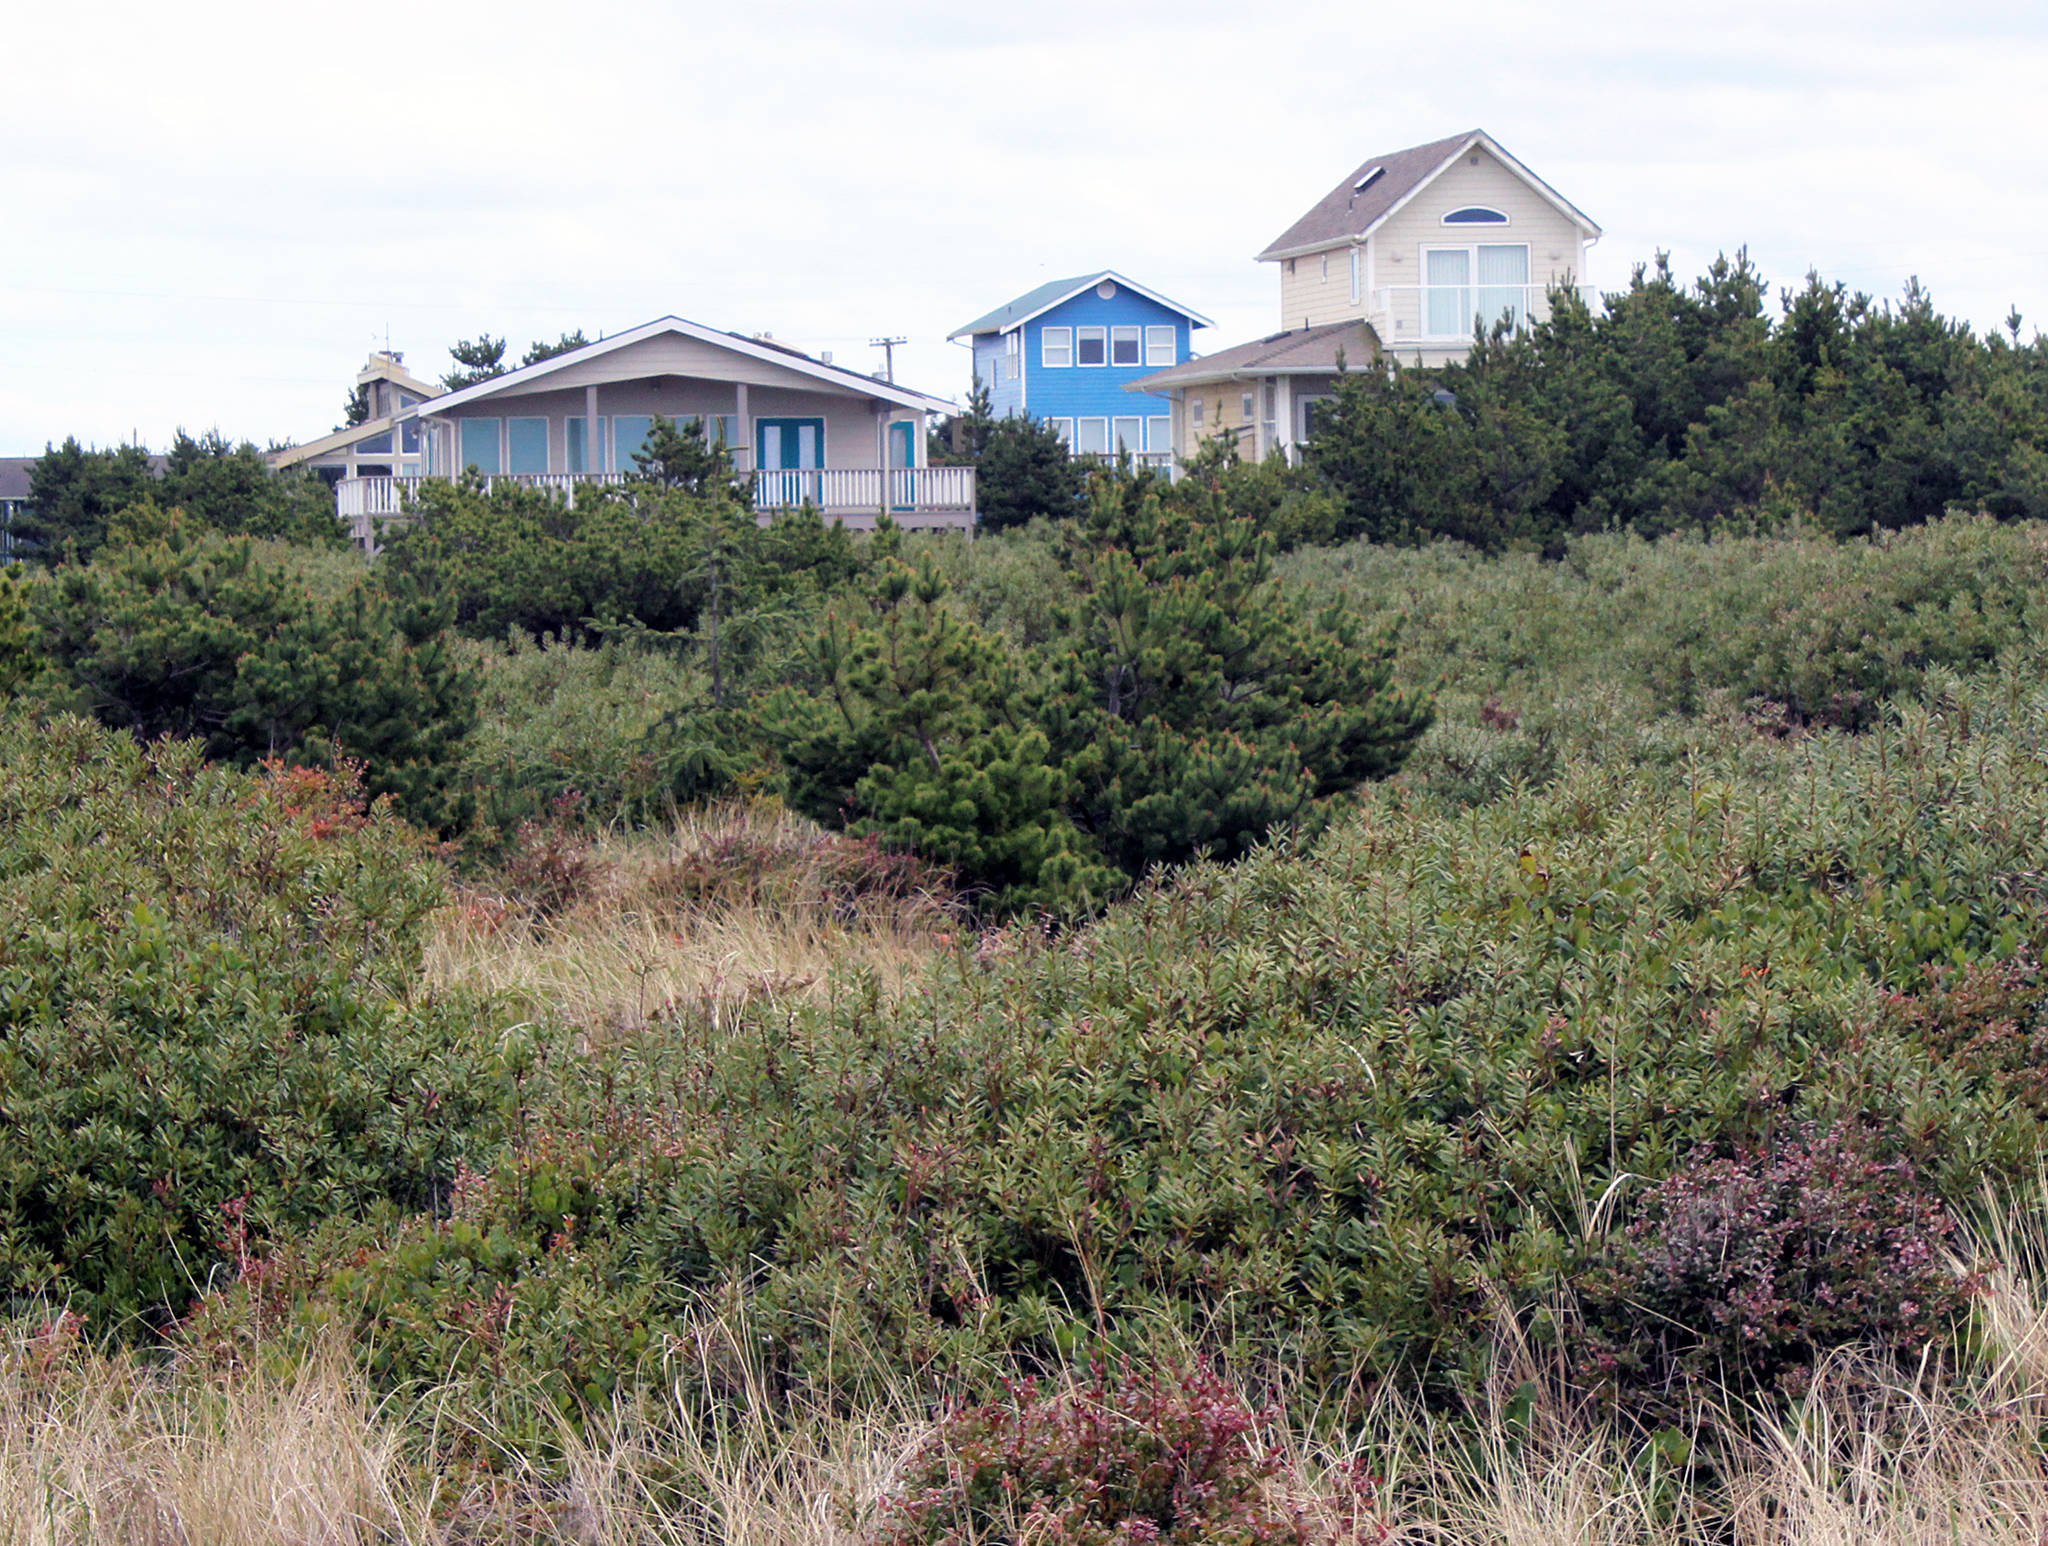 Ocean Shores has to restore its Dunes Protection Act